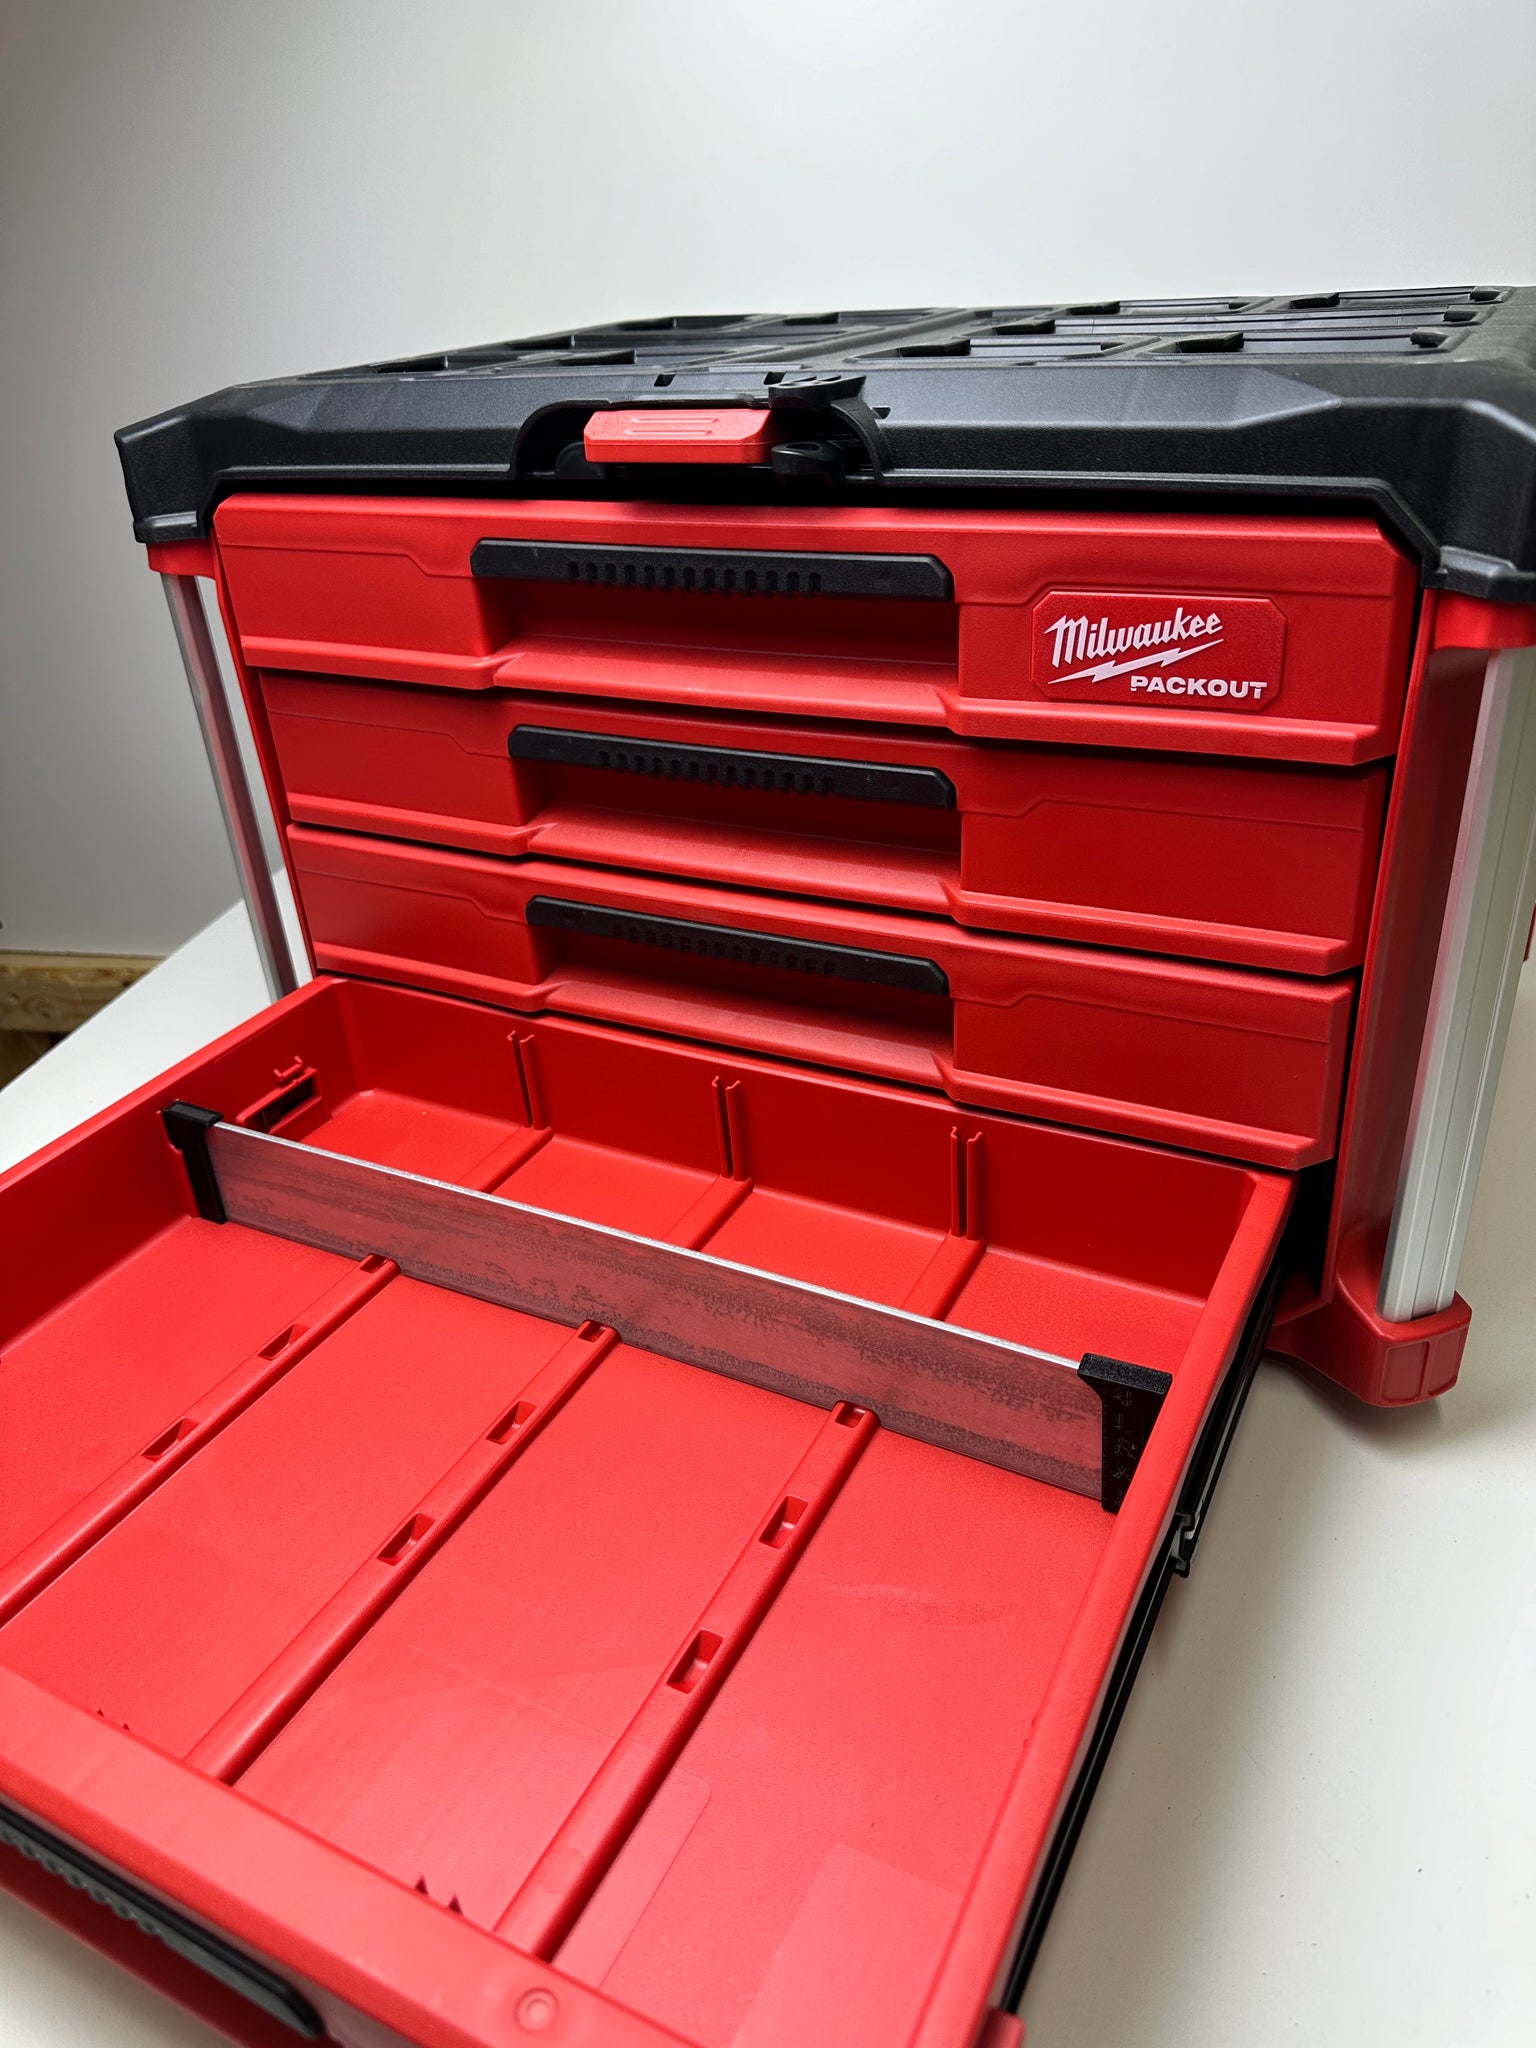 Large Packout Tool Box Divider Milwaukee Packout Mods Accessories